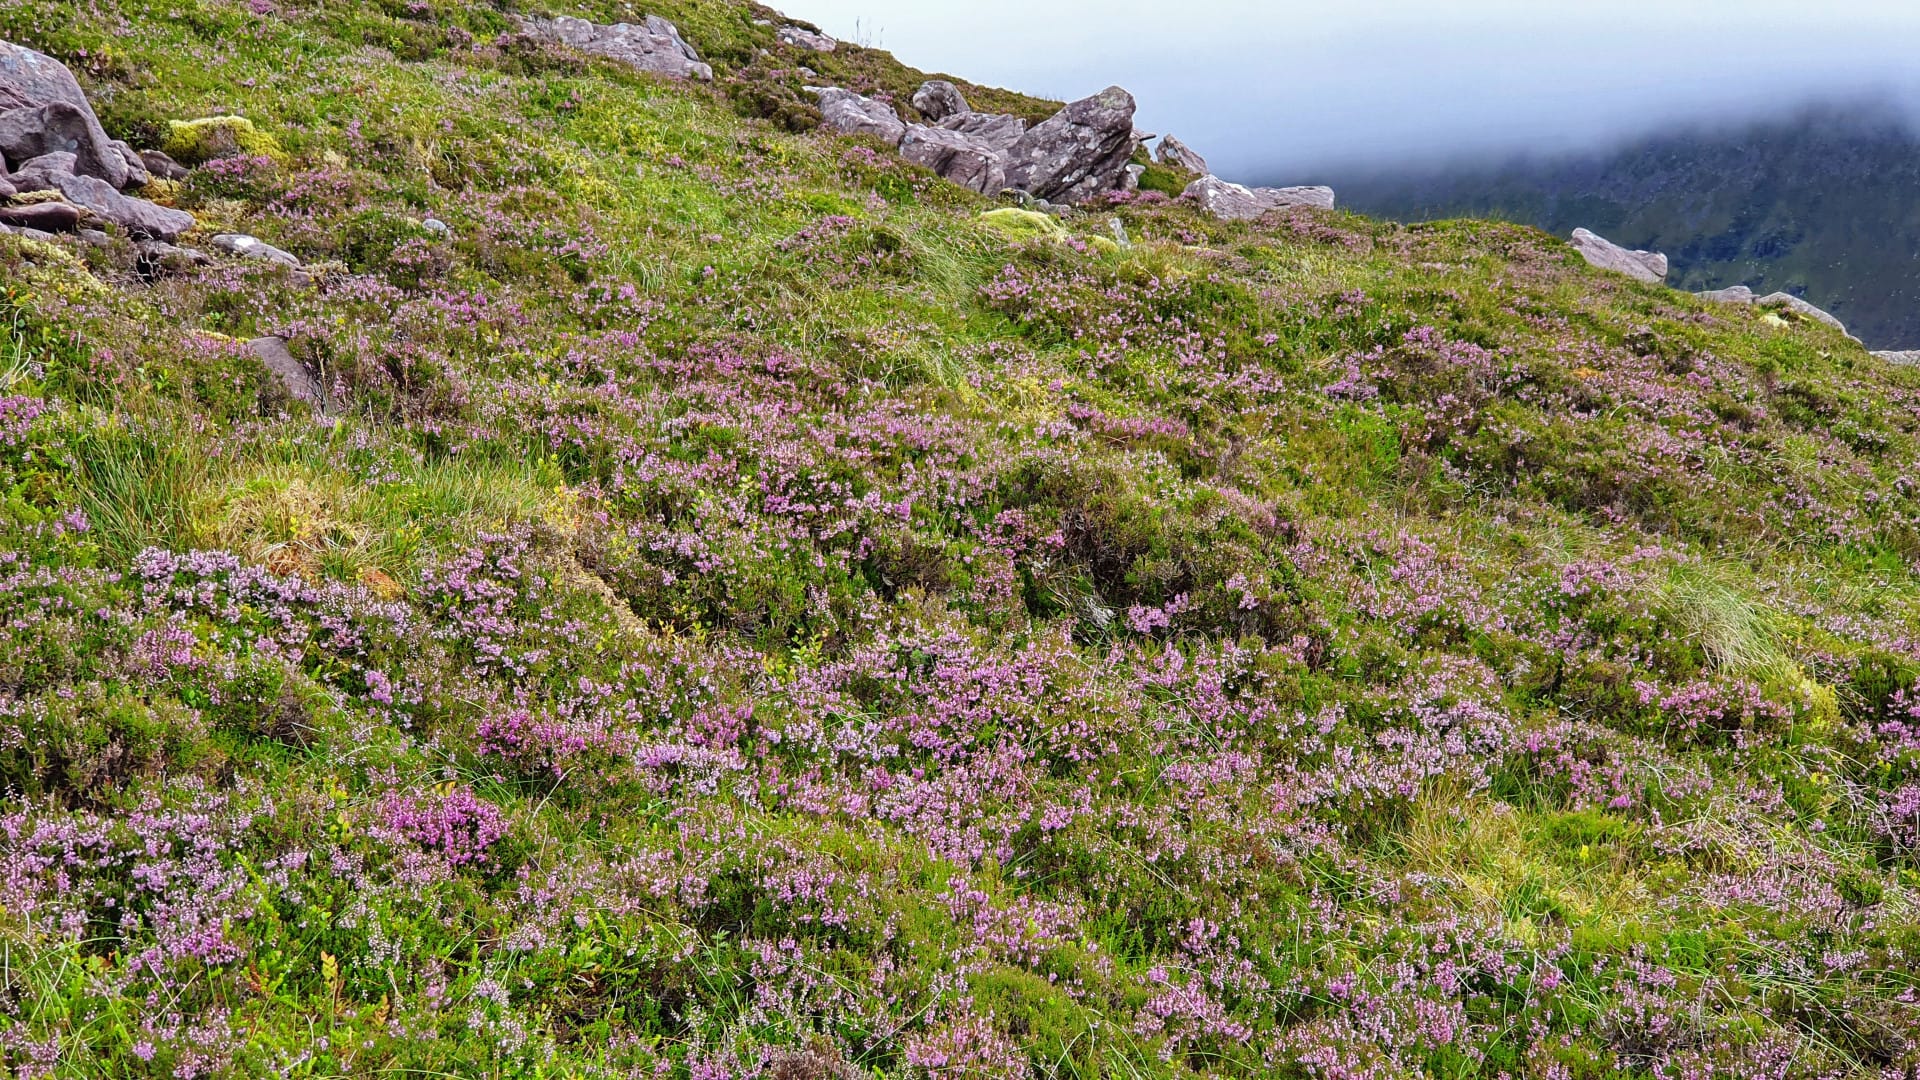 Heather in bloom on the Dingle Peninsula